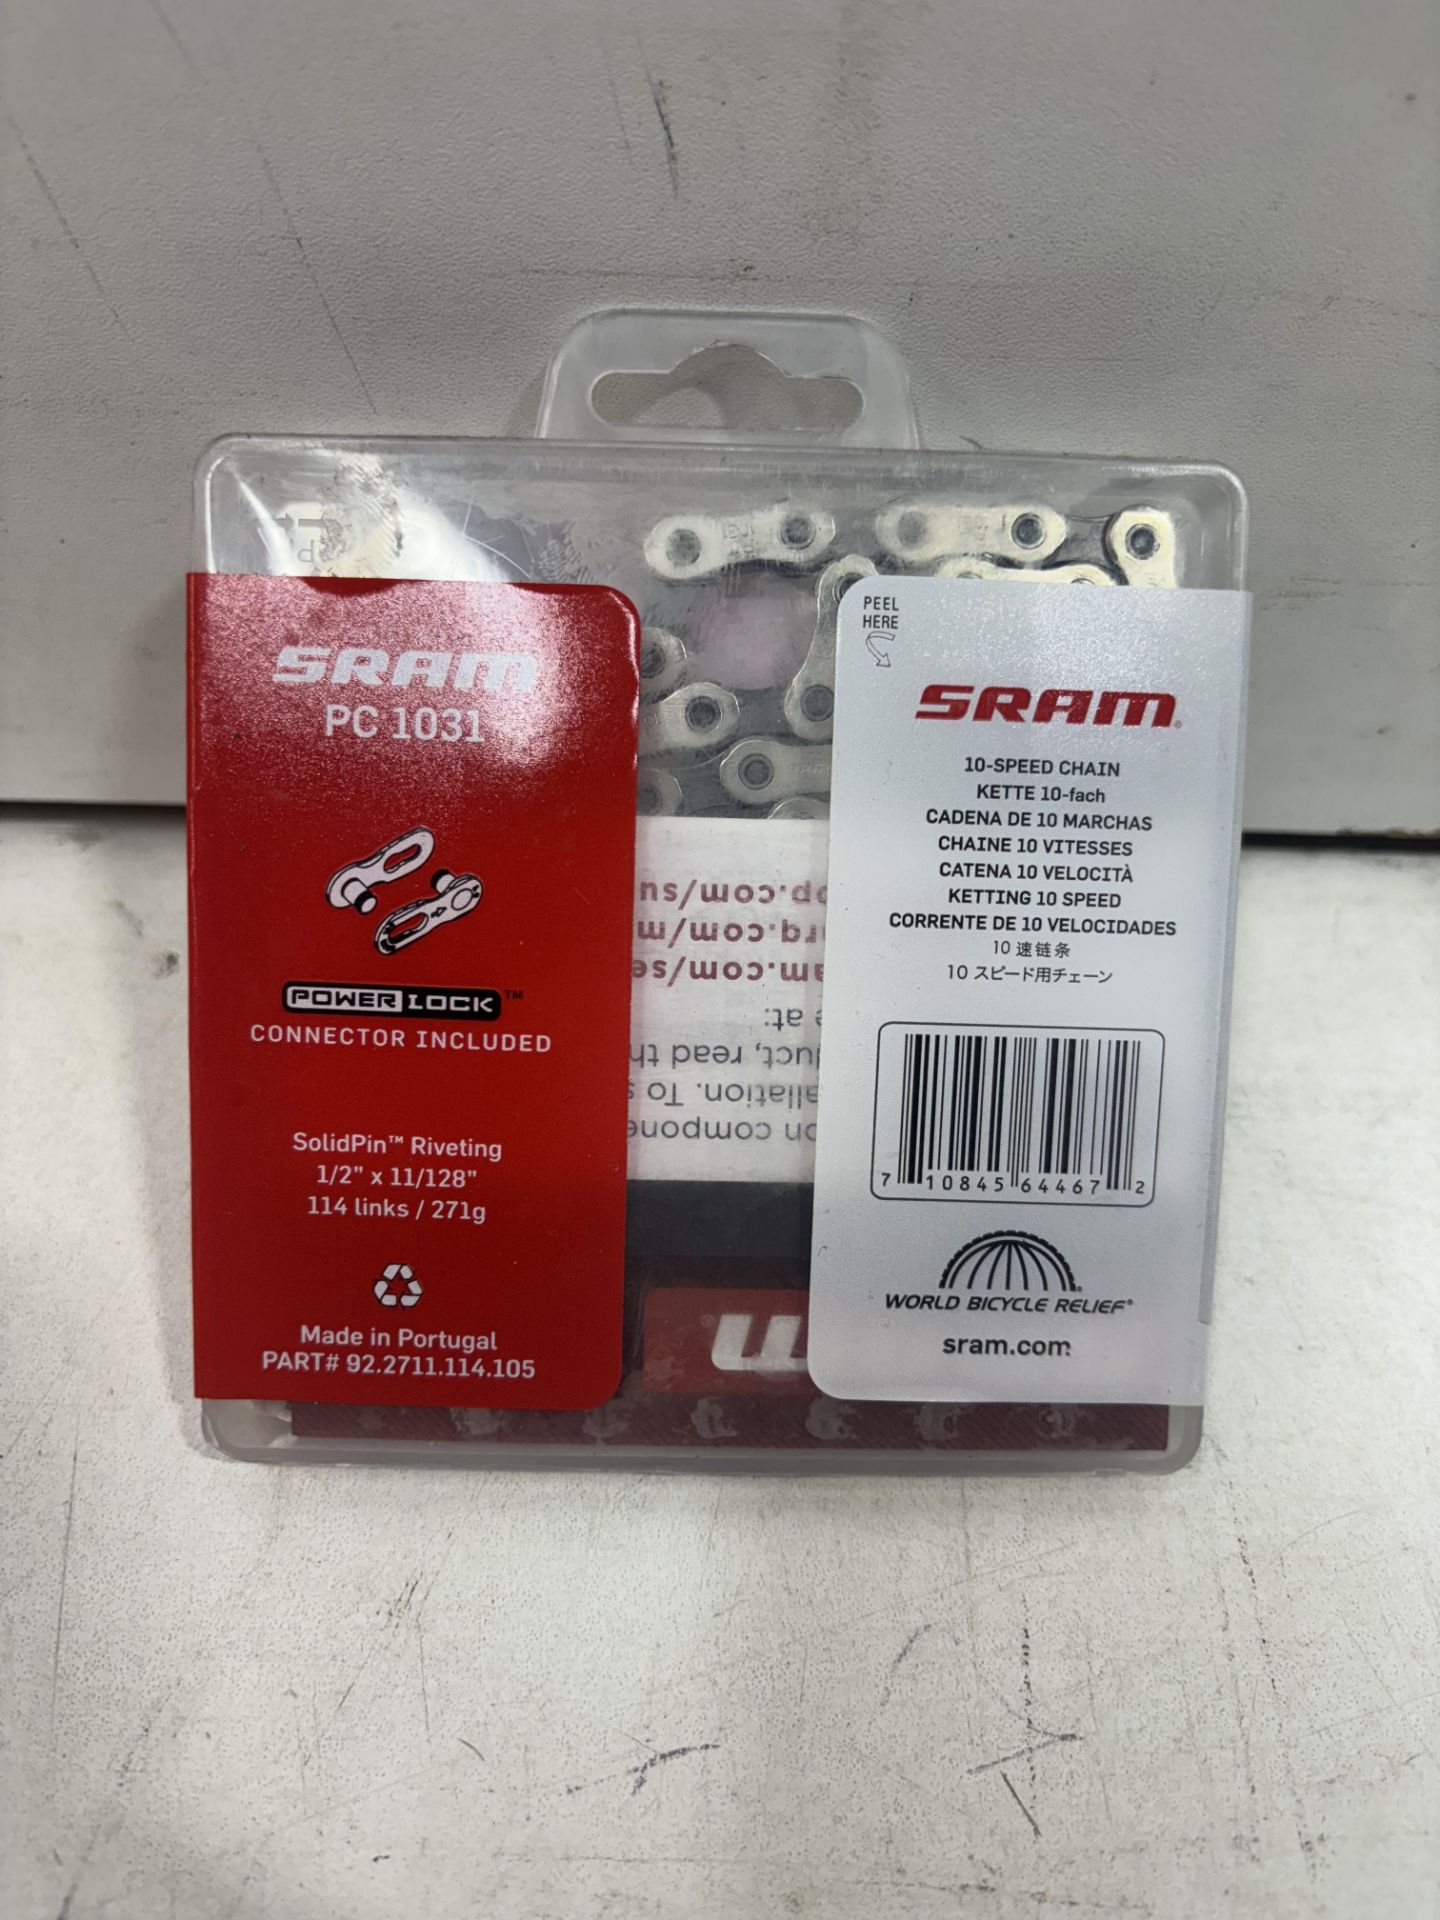 7 x Sram PC1031 10 Speed Chains - 114 Links - Image 5 of 6